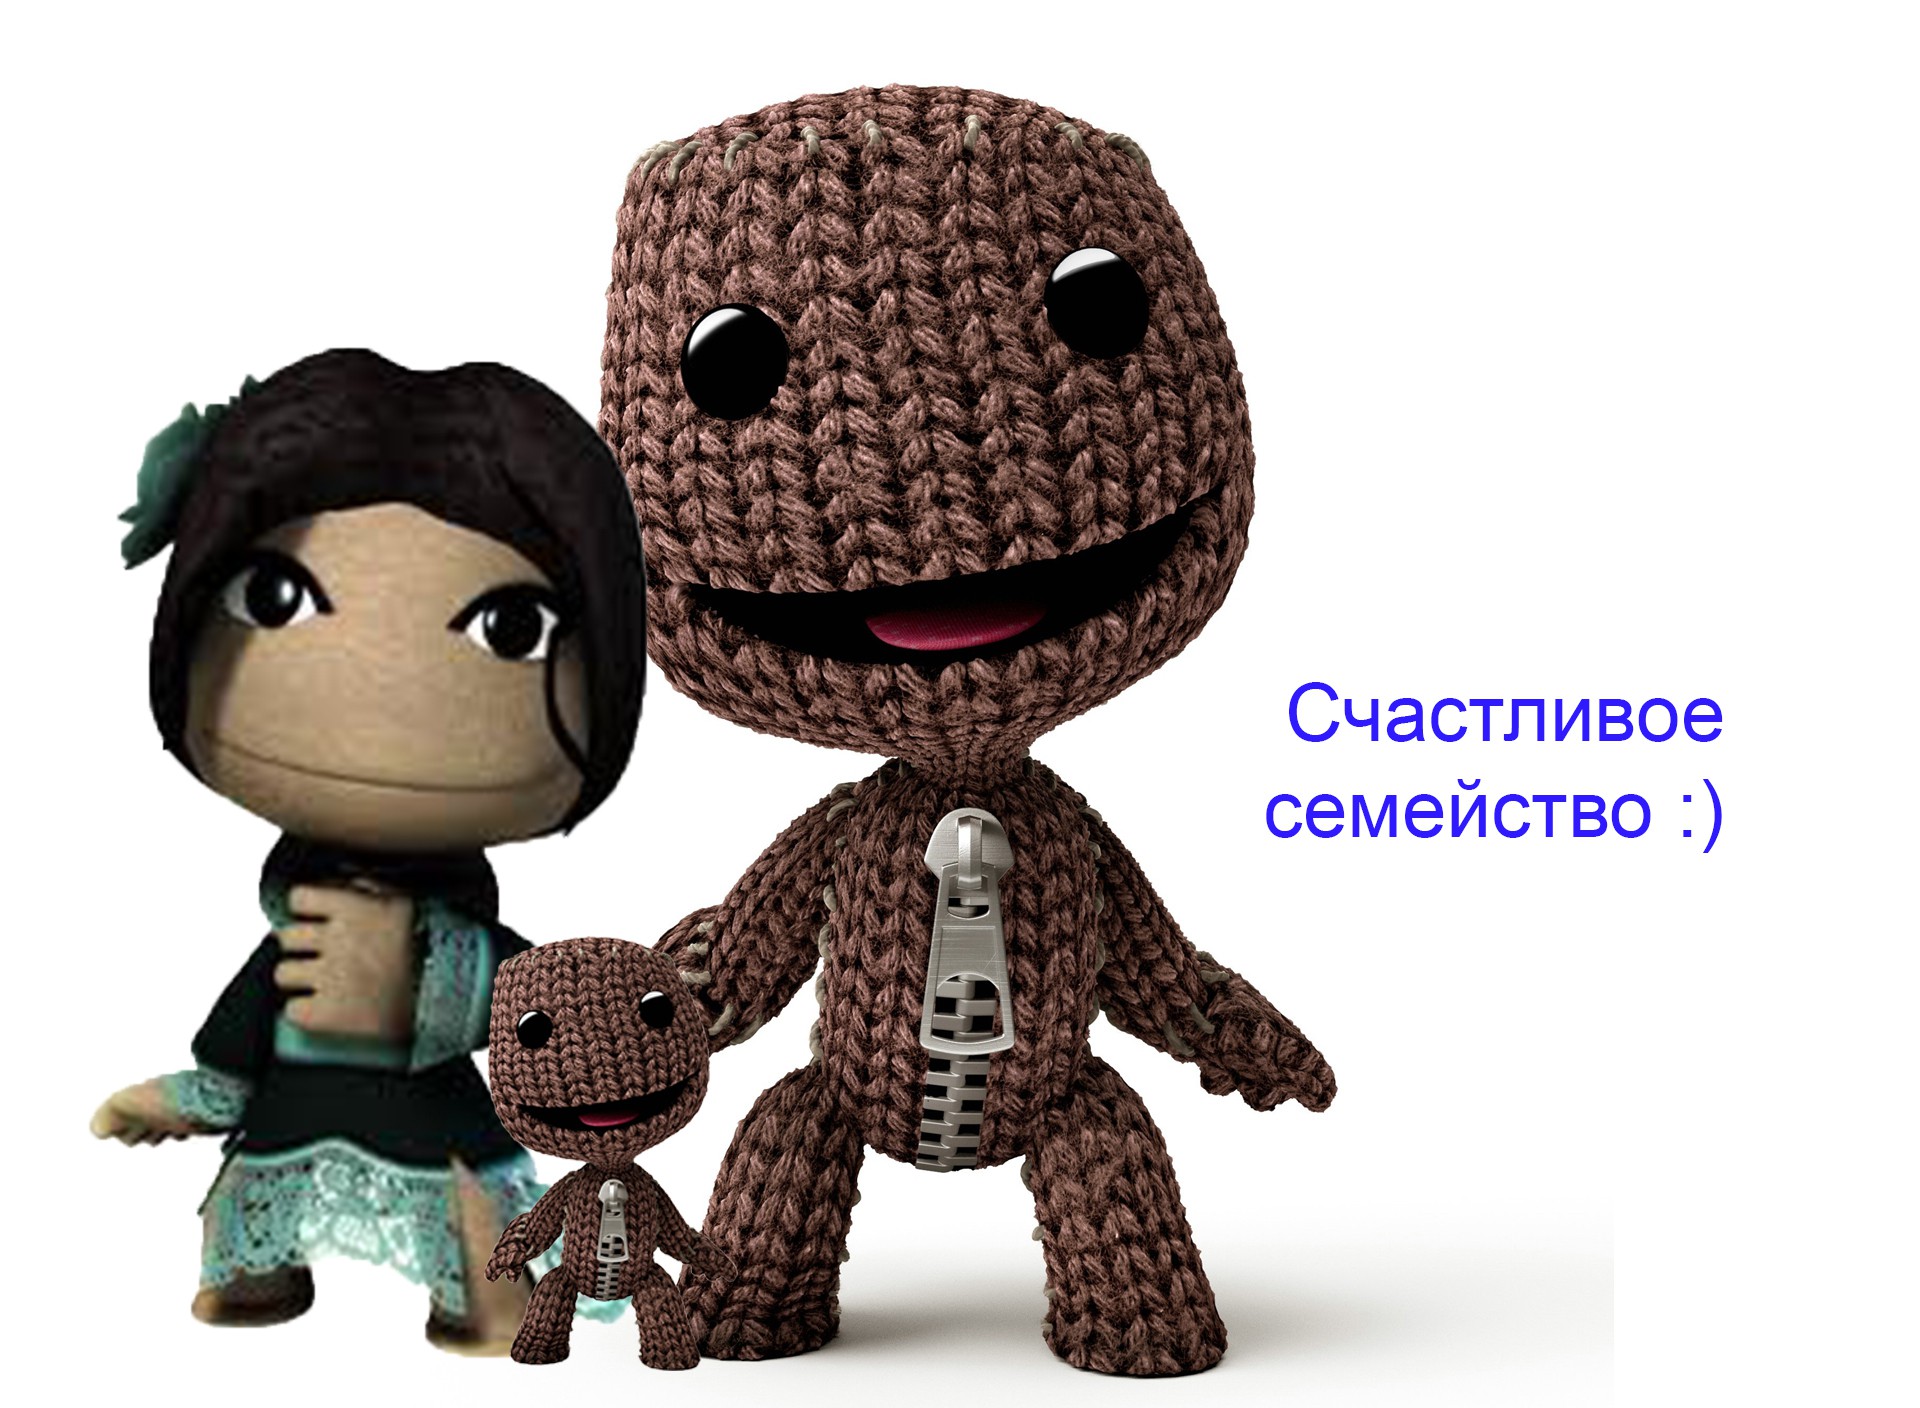 Sackboy and the seed of destruction